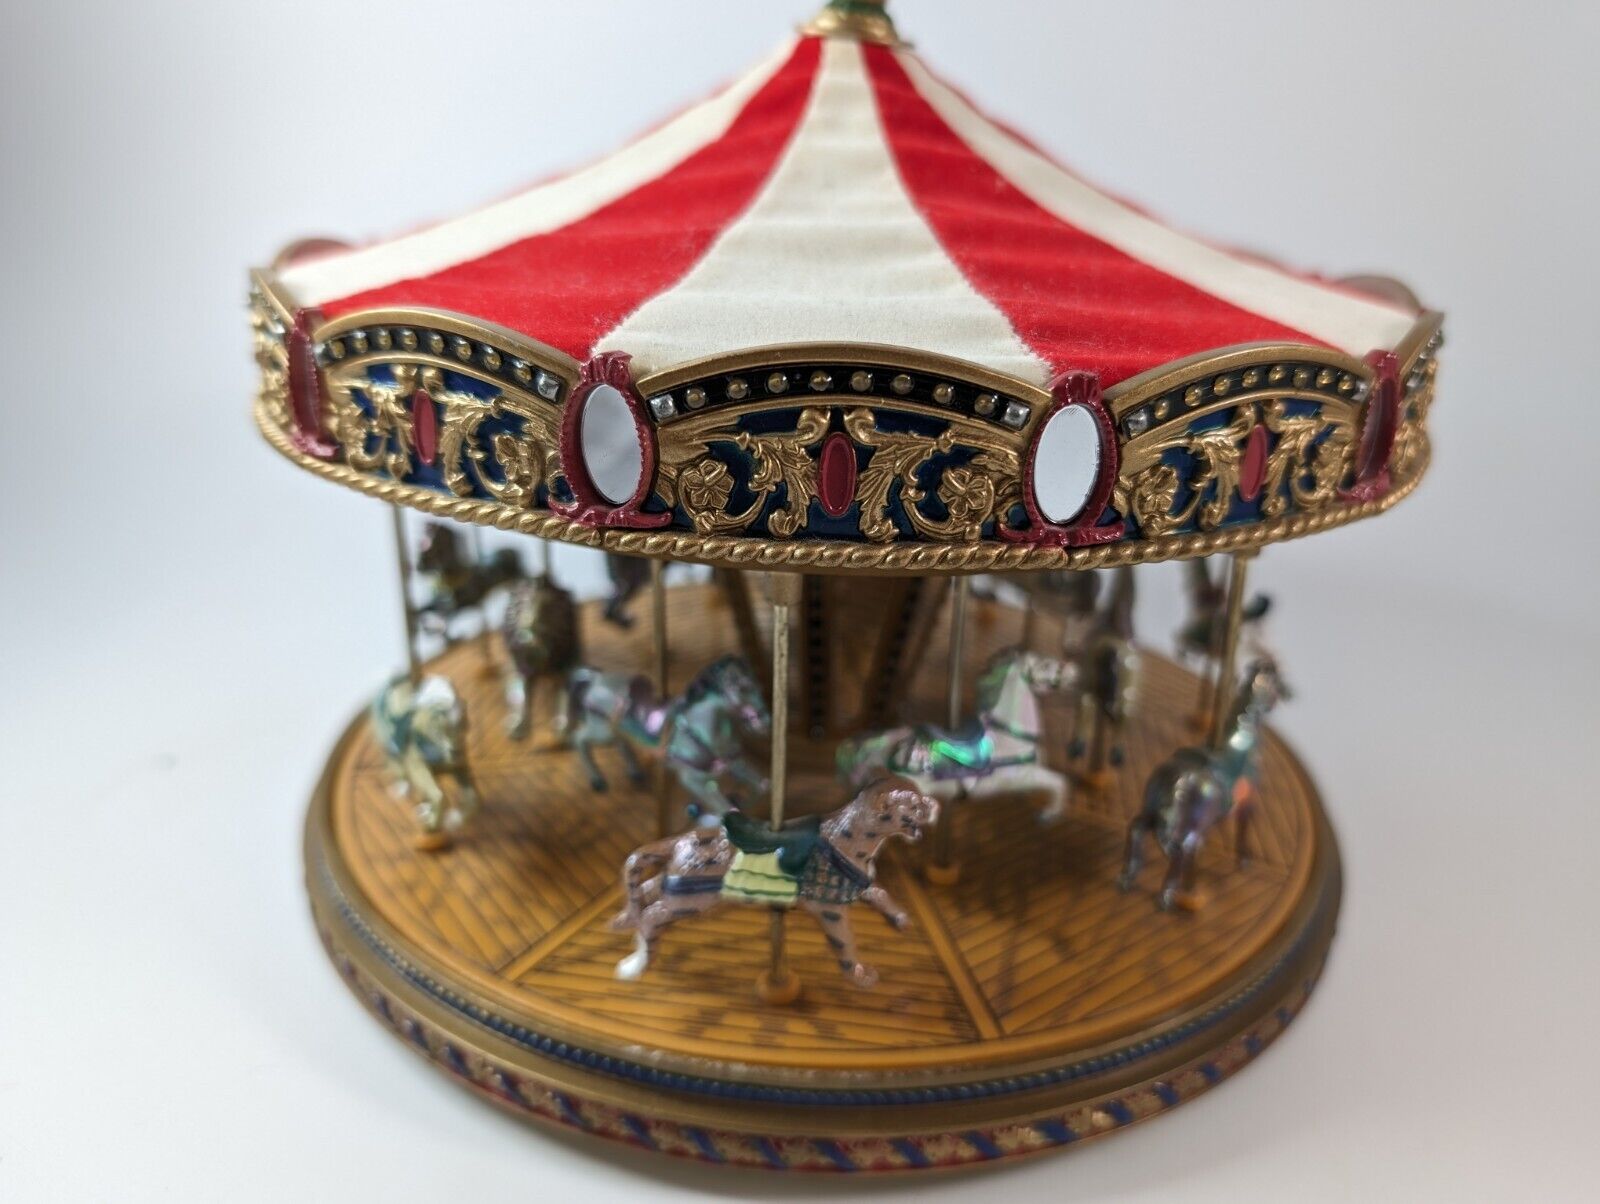 2002 Mr. Christmas Gold Label Collection World's Fair Carousel